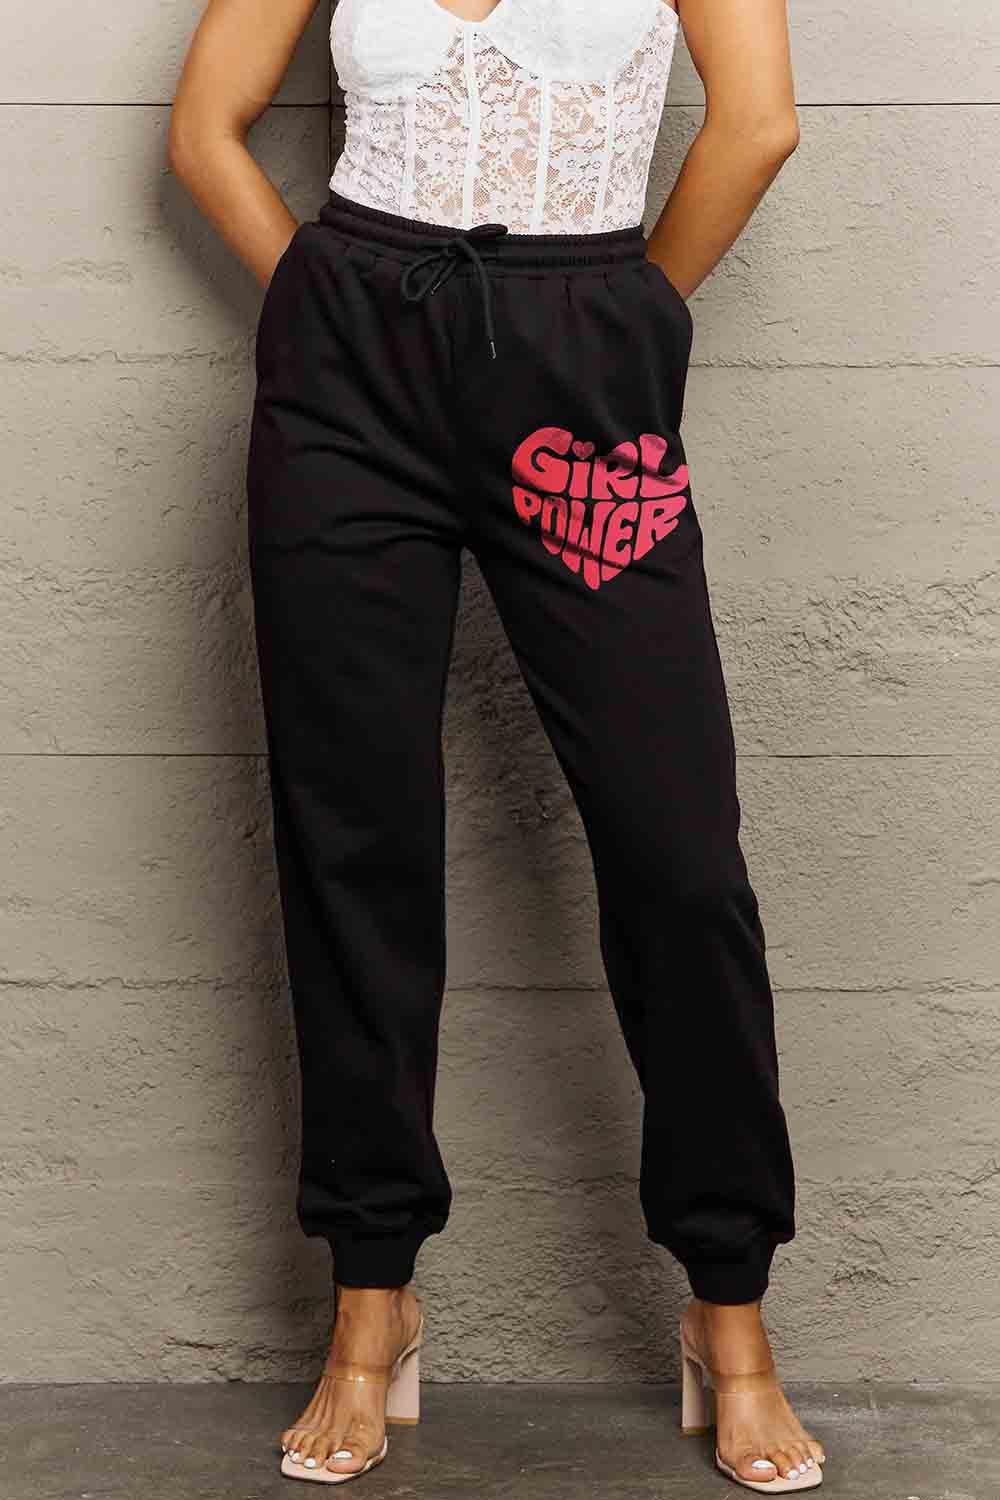 Simply Love Full Size GIRL POWER Graphic Sweatpants - Lab Fashion, Home & Health